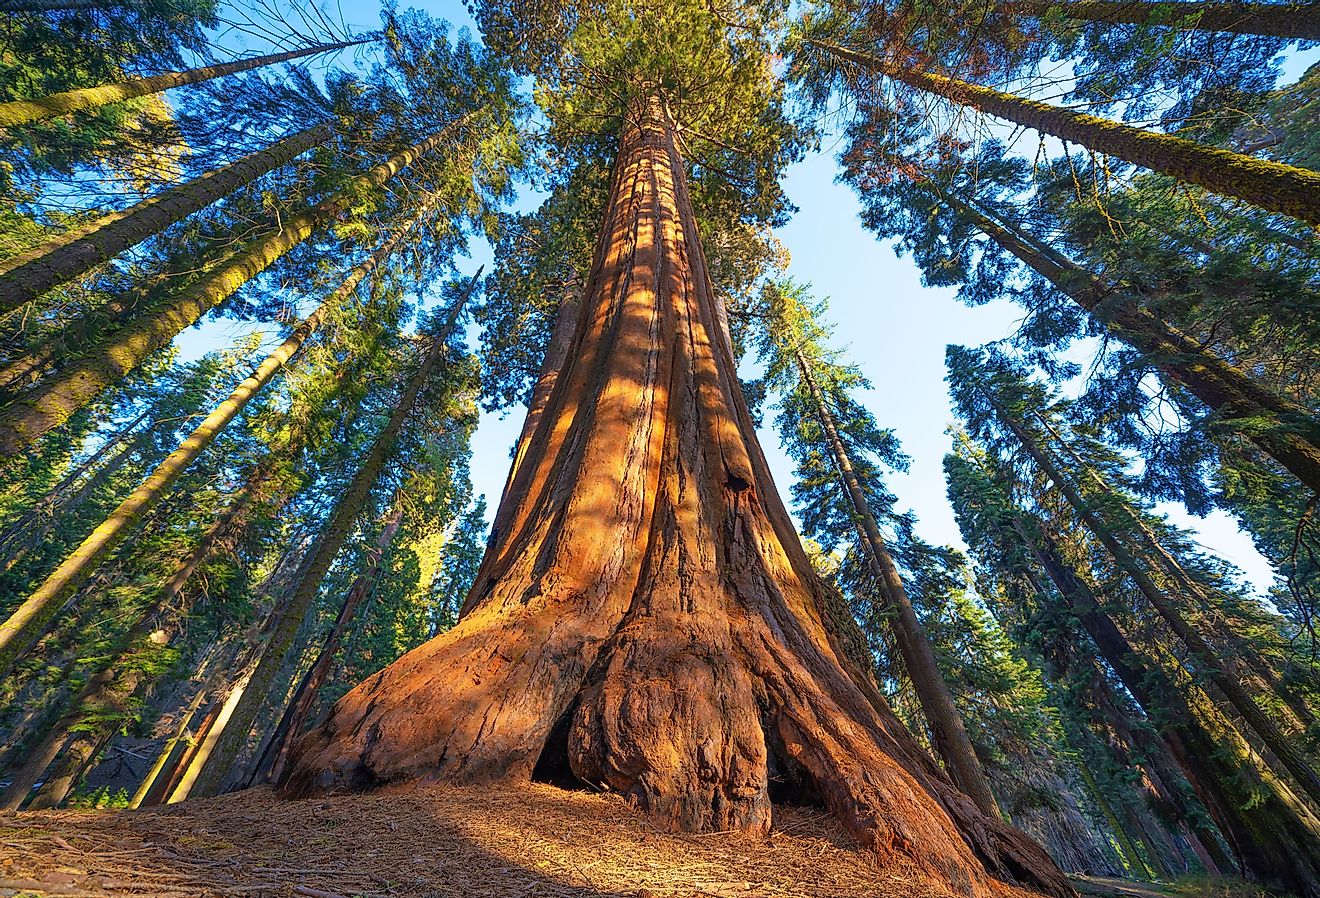 Famous Sequoia park and giant sequoia trees at sunset. Image credit IM_photo via Shutterstock